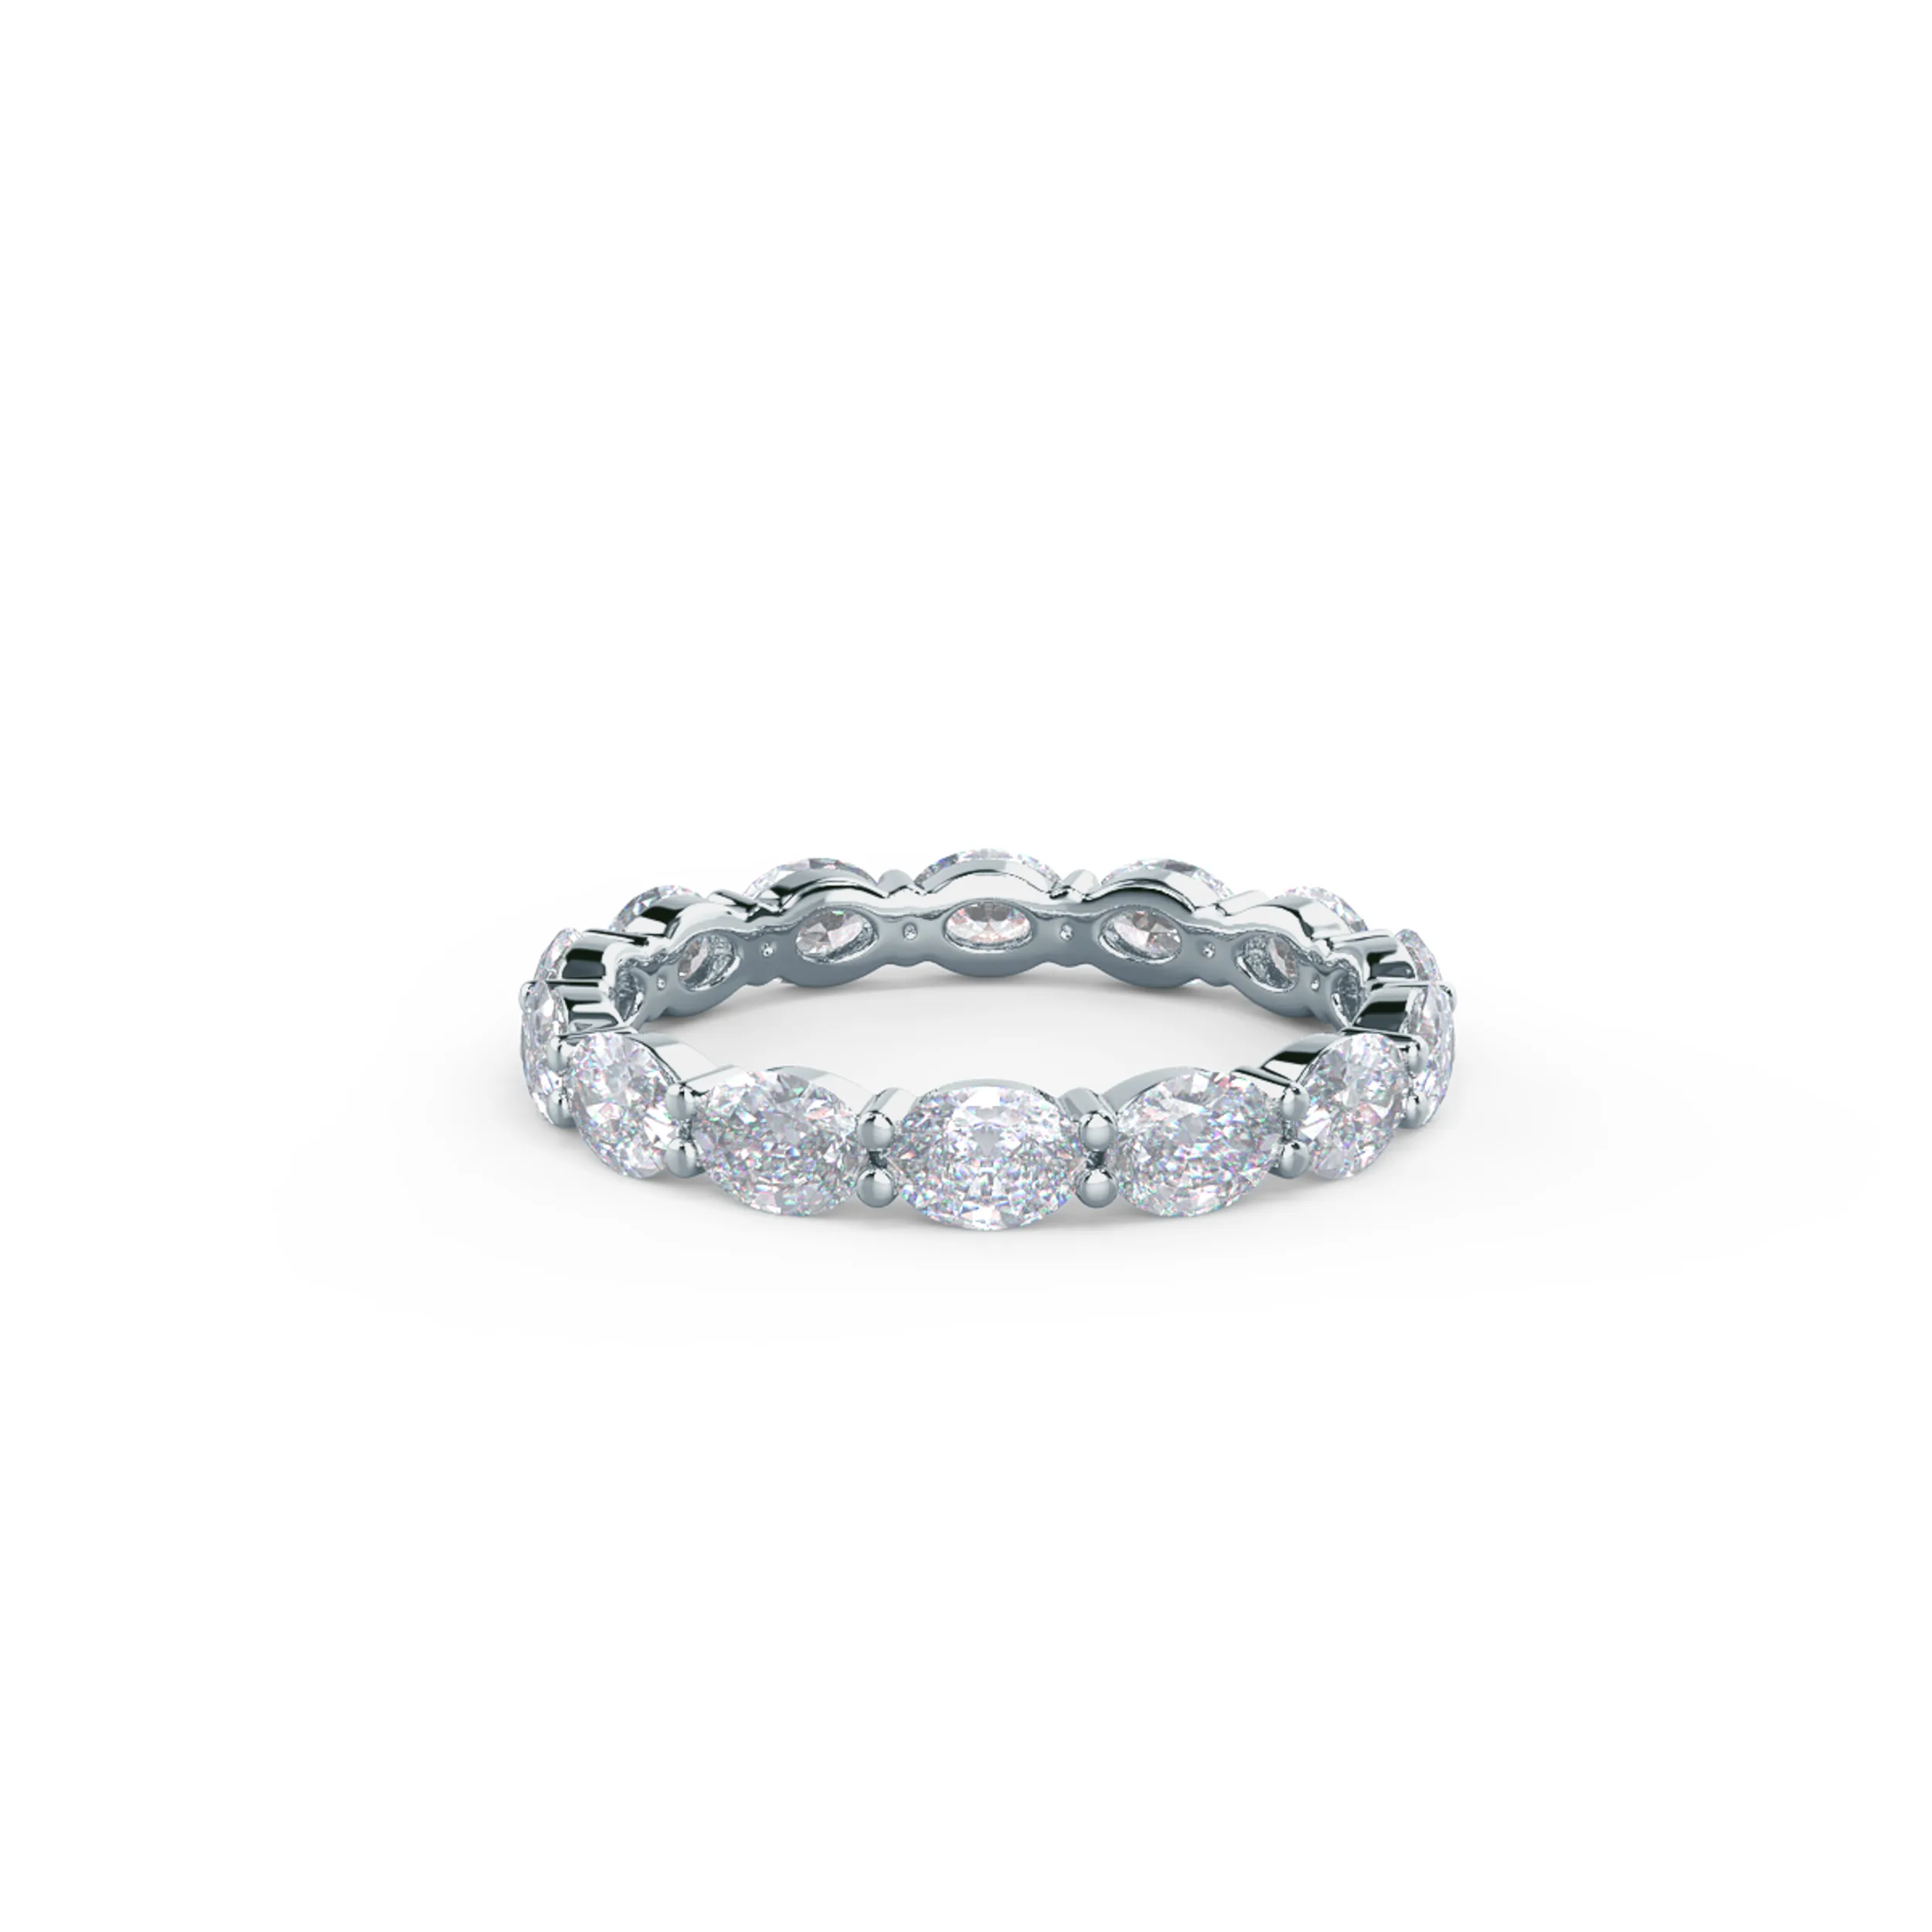 18k White Gold East-West Oval Eternity Band featuring High Quality 2.0 Carat Diamonds (Main View)